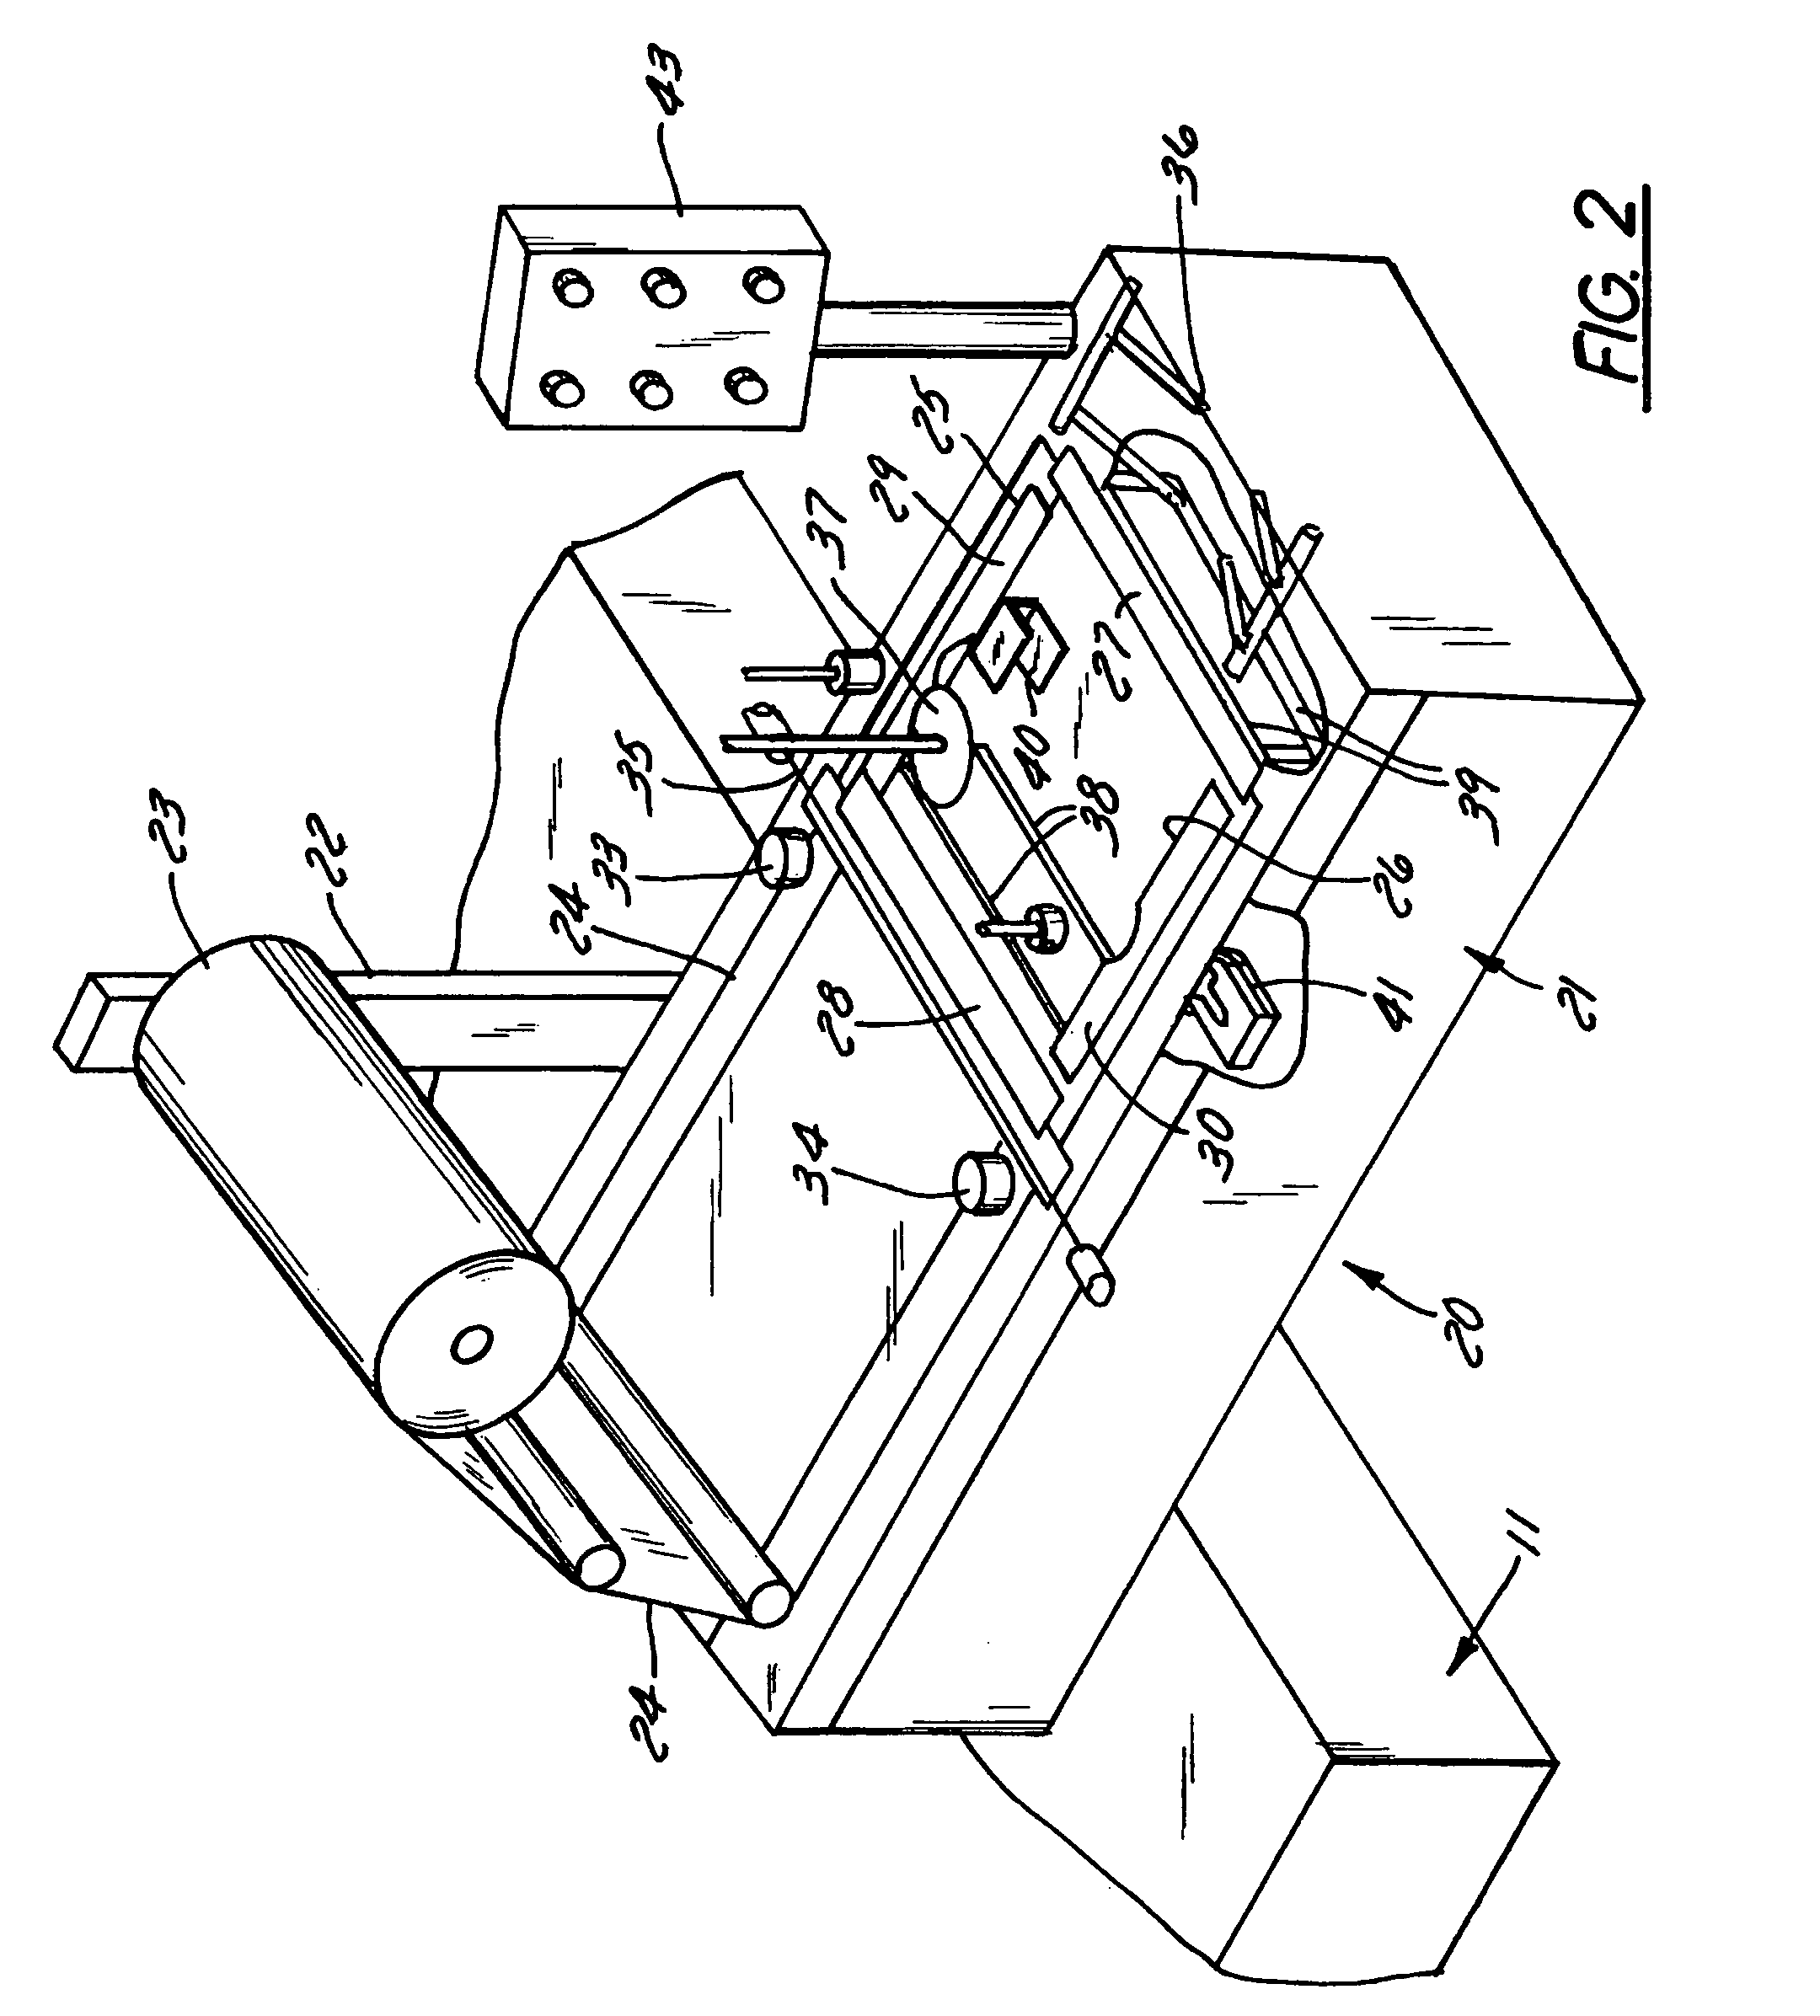 Apparatus and method for stretch-wrapping articles